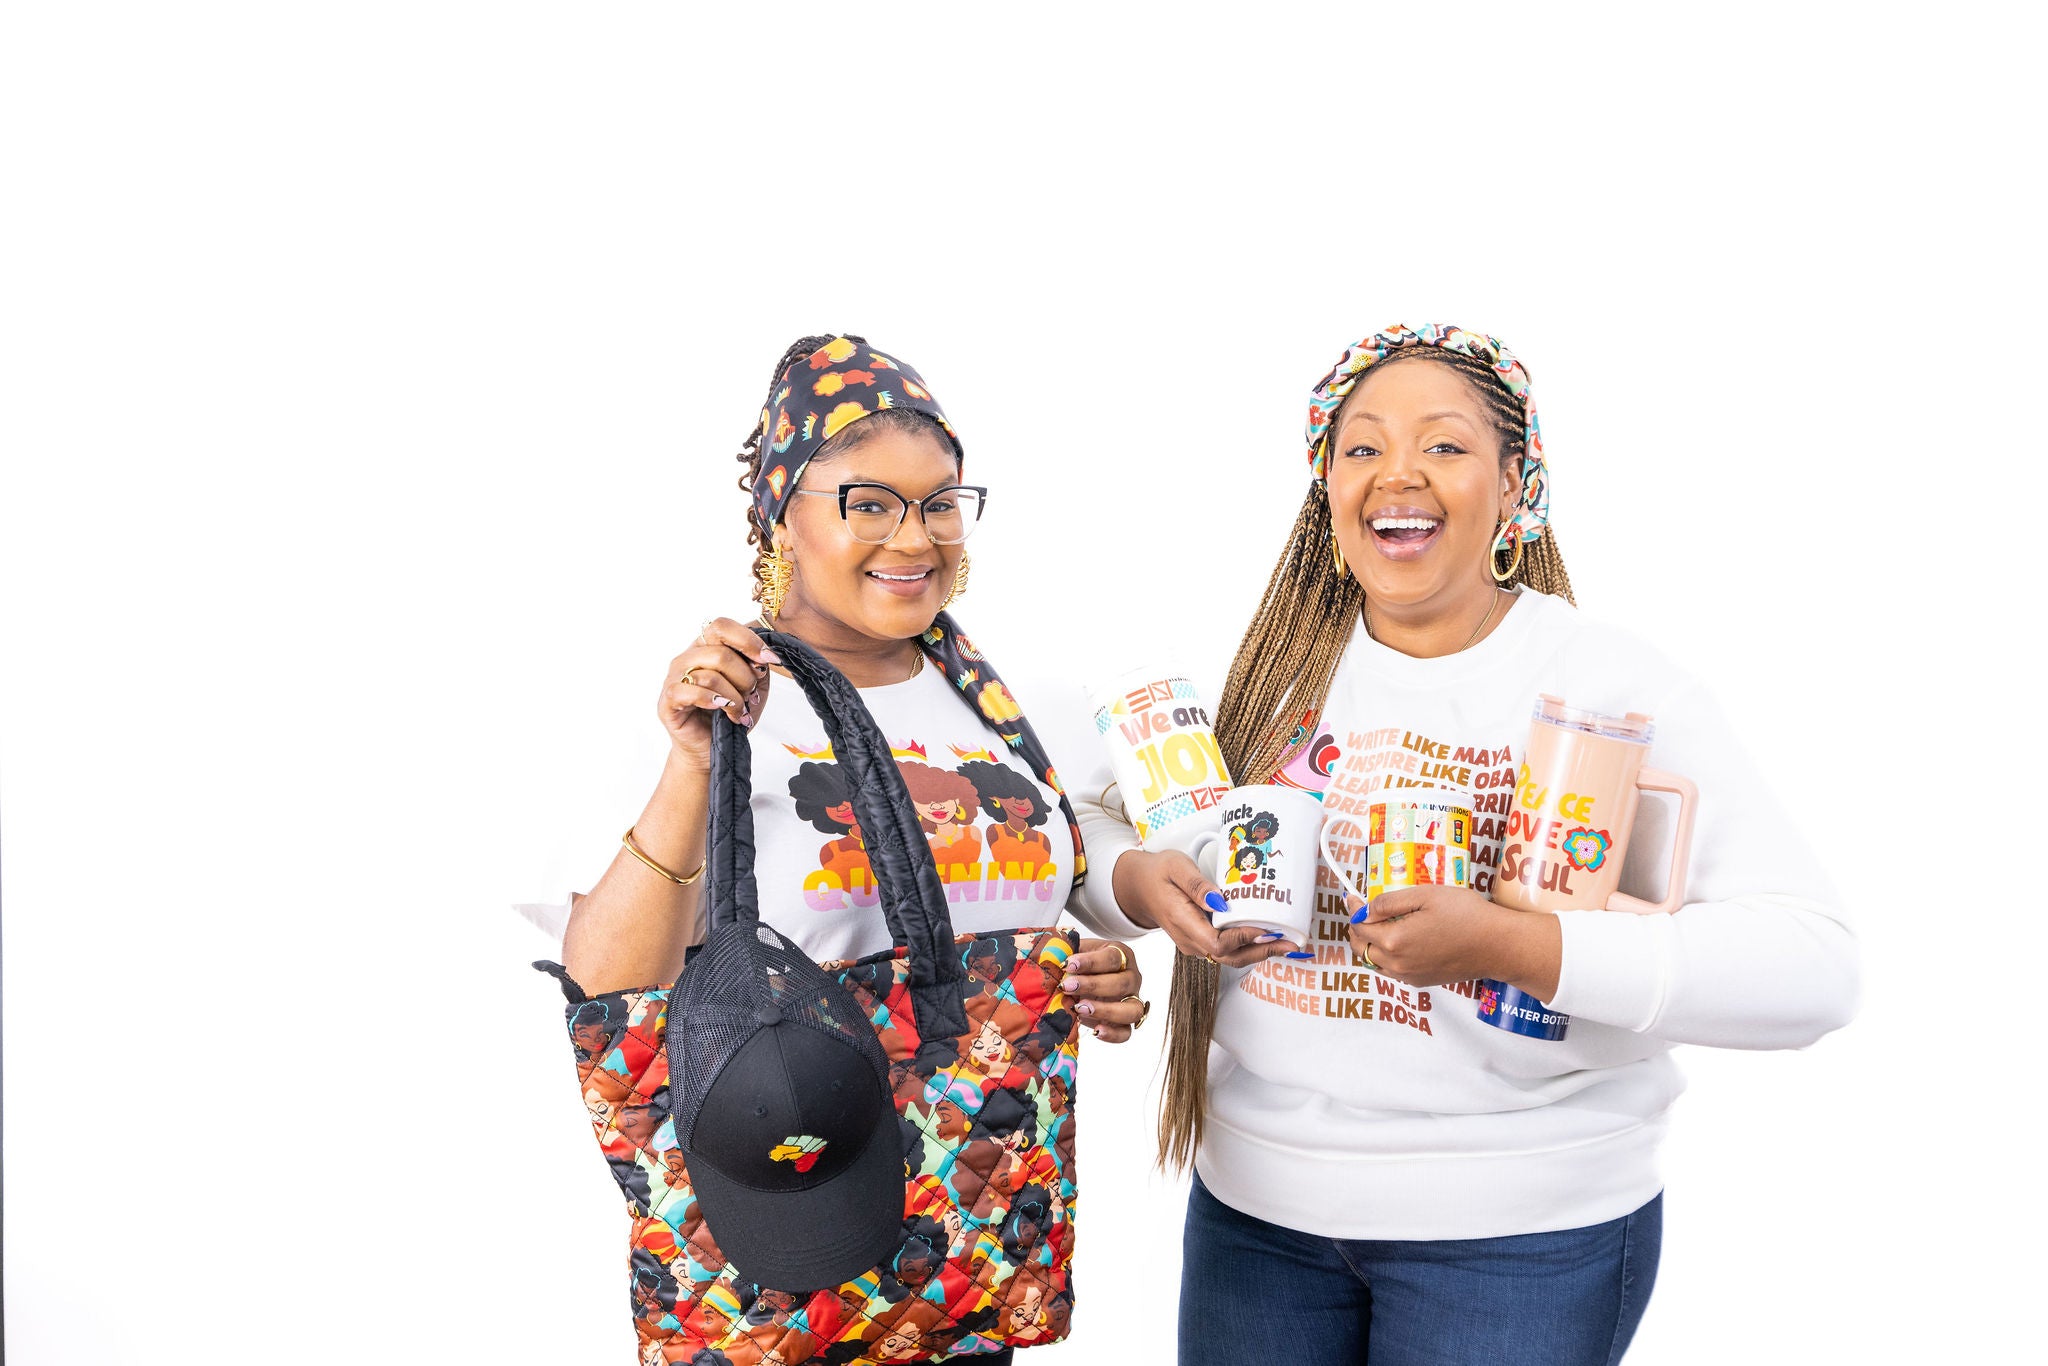 The image shows two women smiling brightly against a white background. The woman on the left is wearing glasses and a colorful head wrap, holding a patterned bag and a black cap. The woman on the right, with braided hair and a headband, is holding a clear tumbler and a mug with inspirational quotes. Both wear white shirts with a joyful print, exuding a positive and spirited vibe.